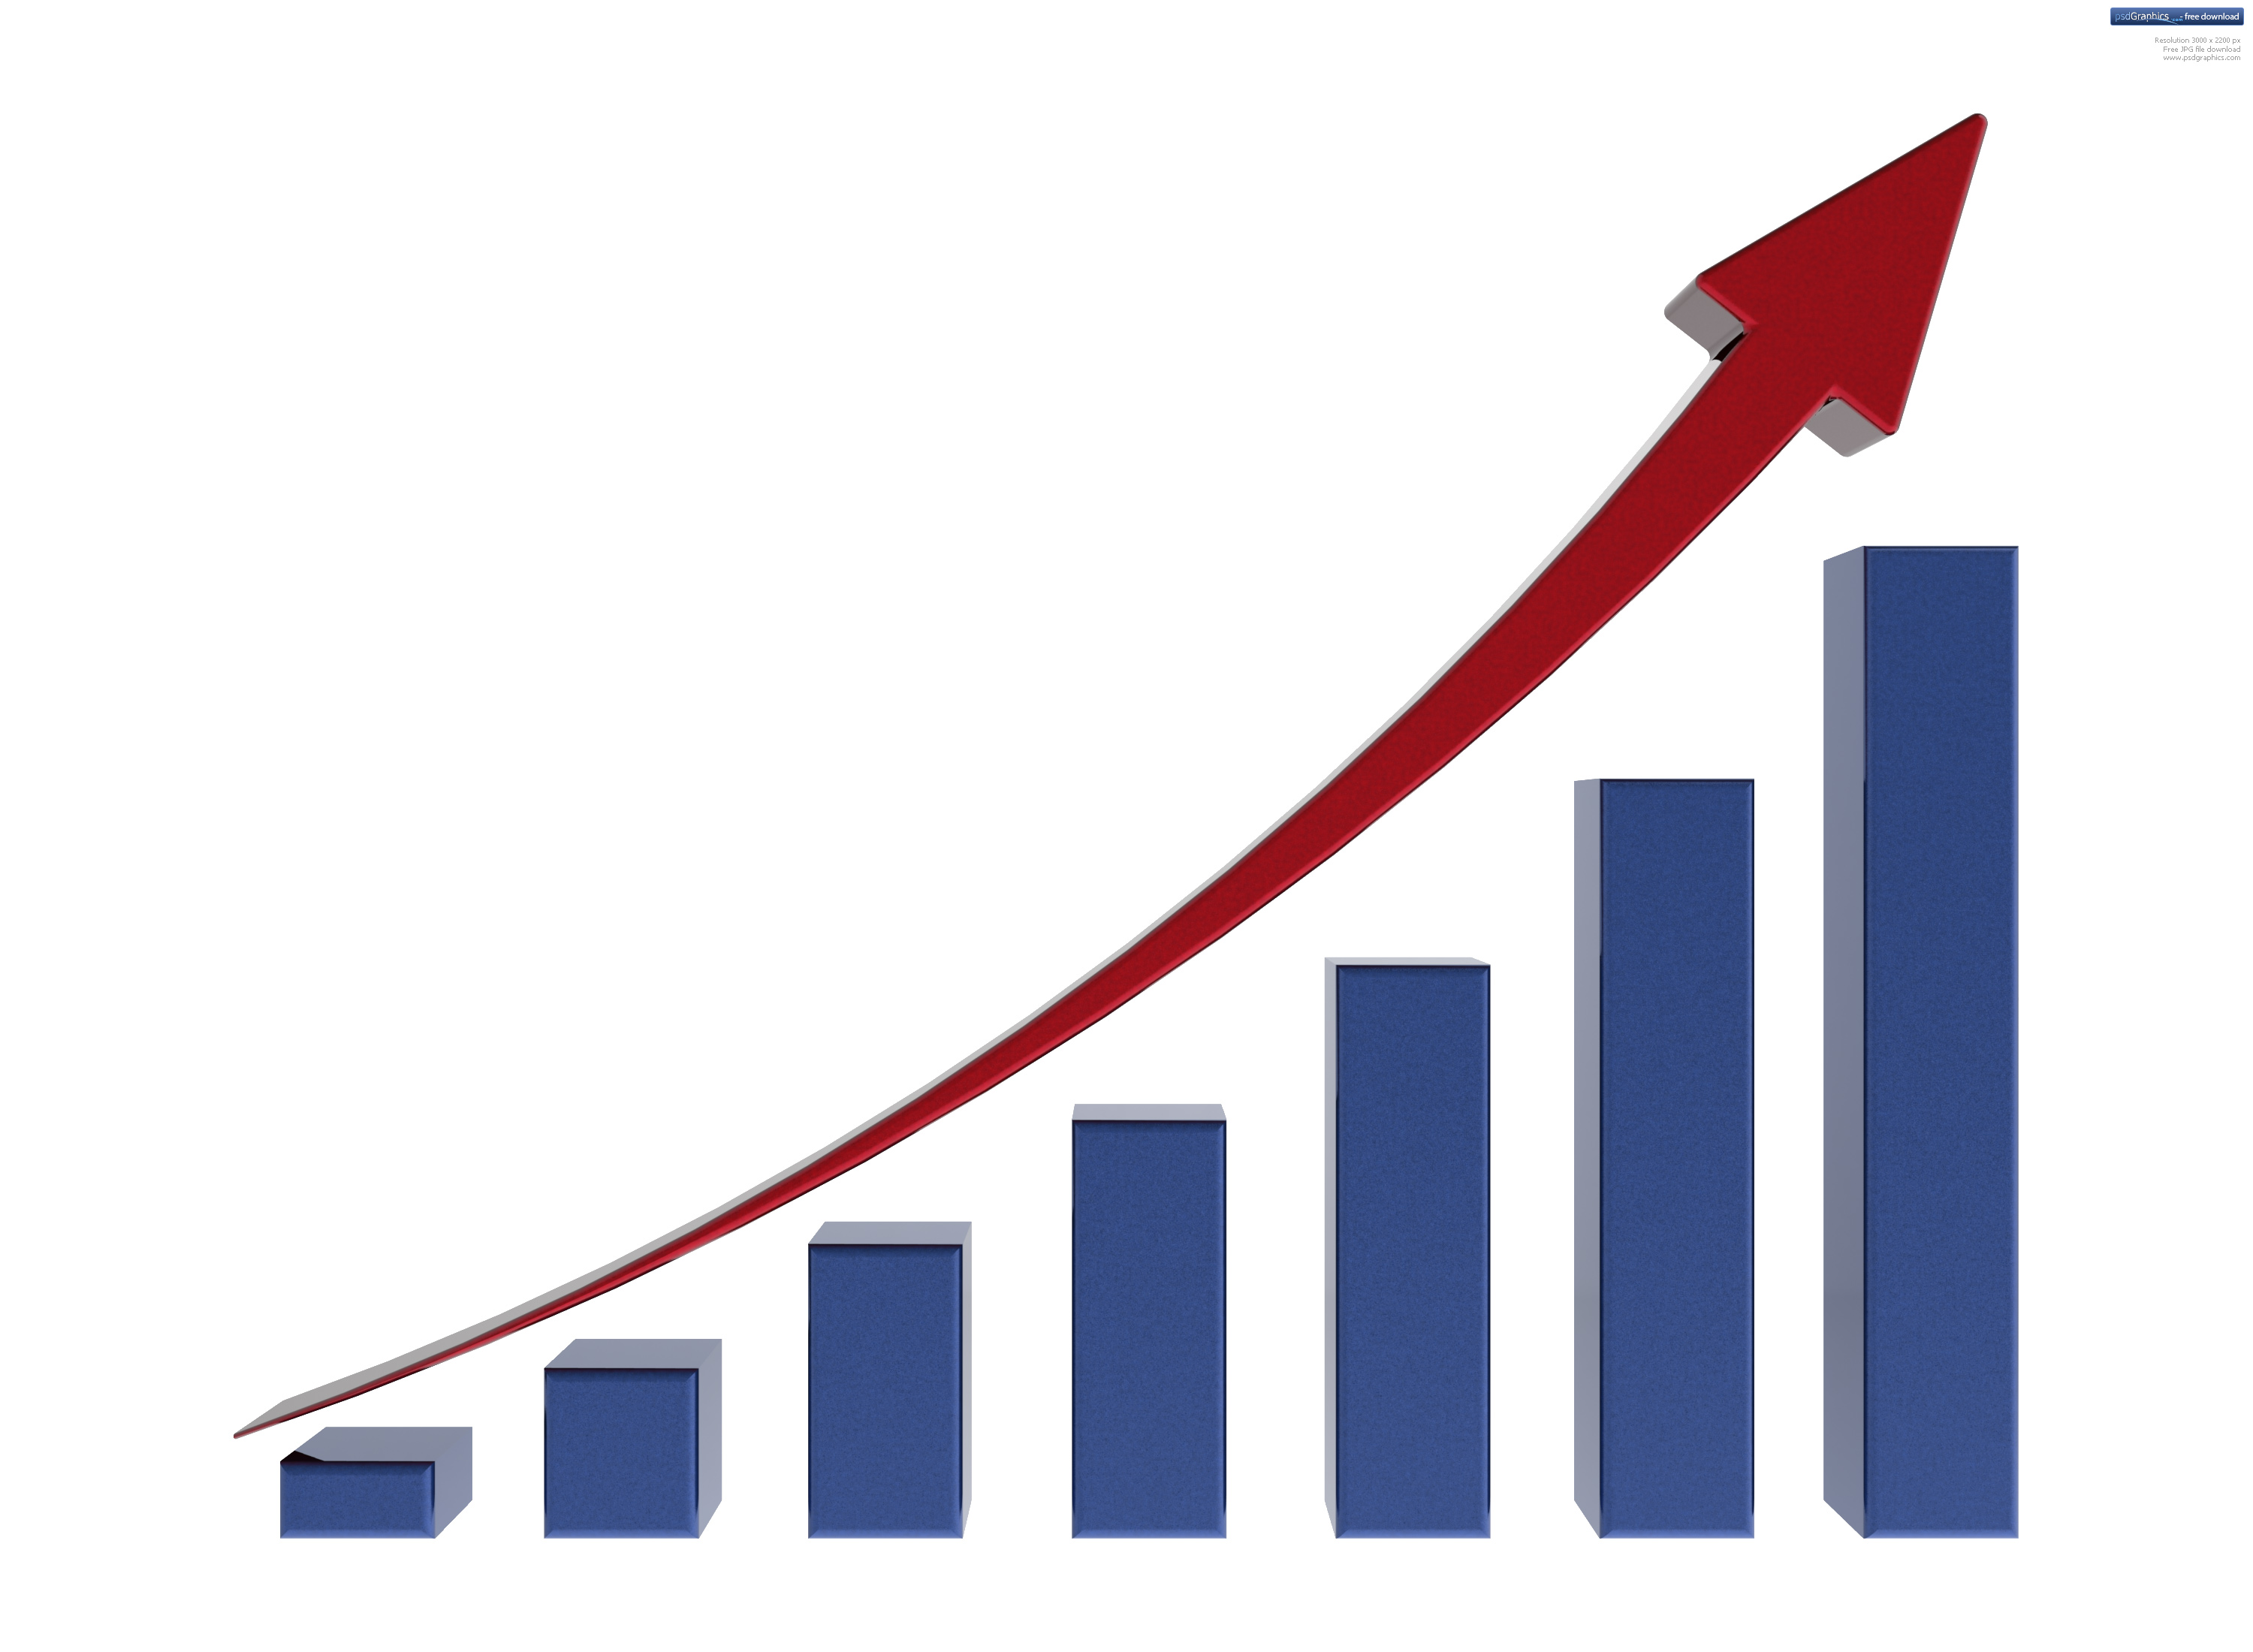 Importance Of Growth Chart